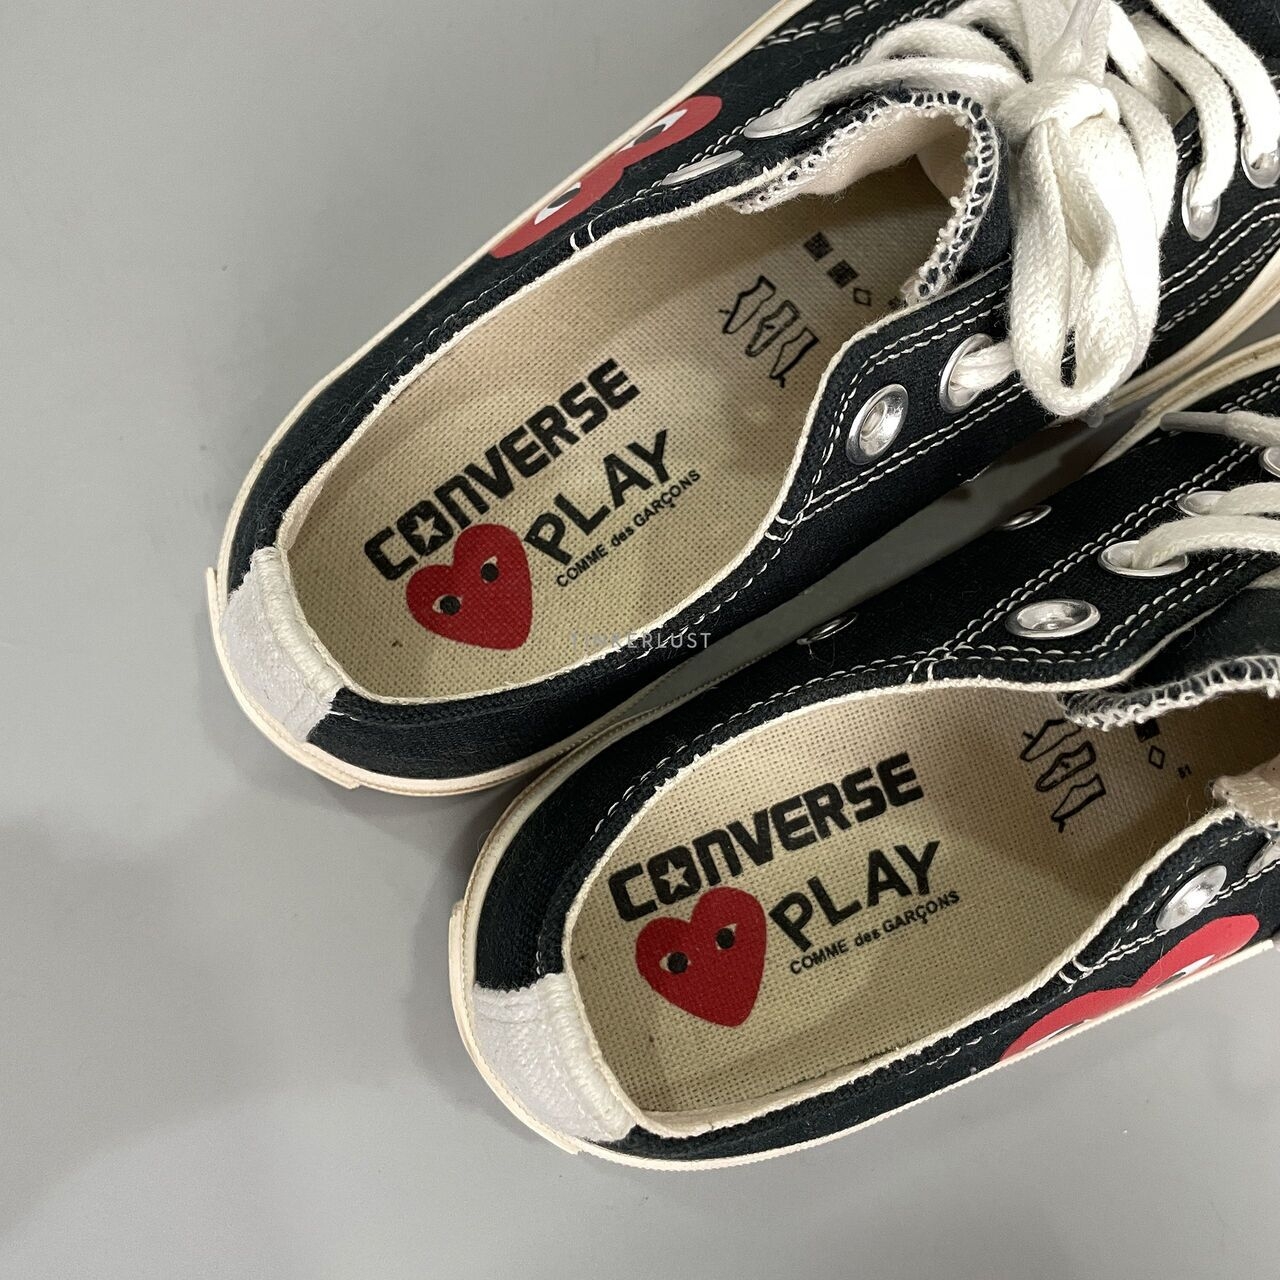 Converse Black CT 70 Low x Play Comme Des Garcons Sneakers